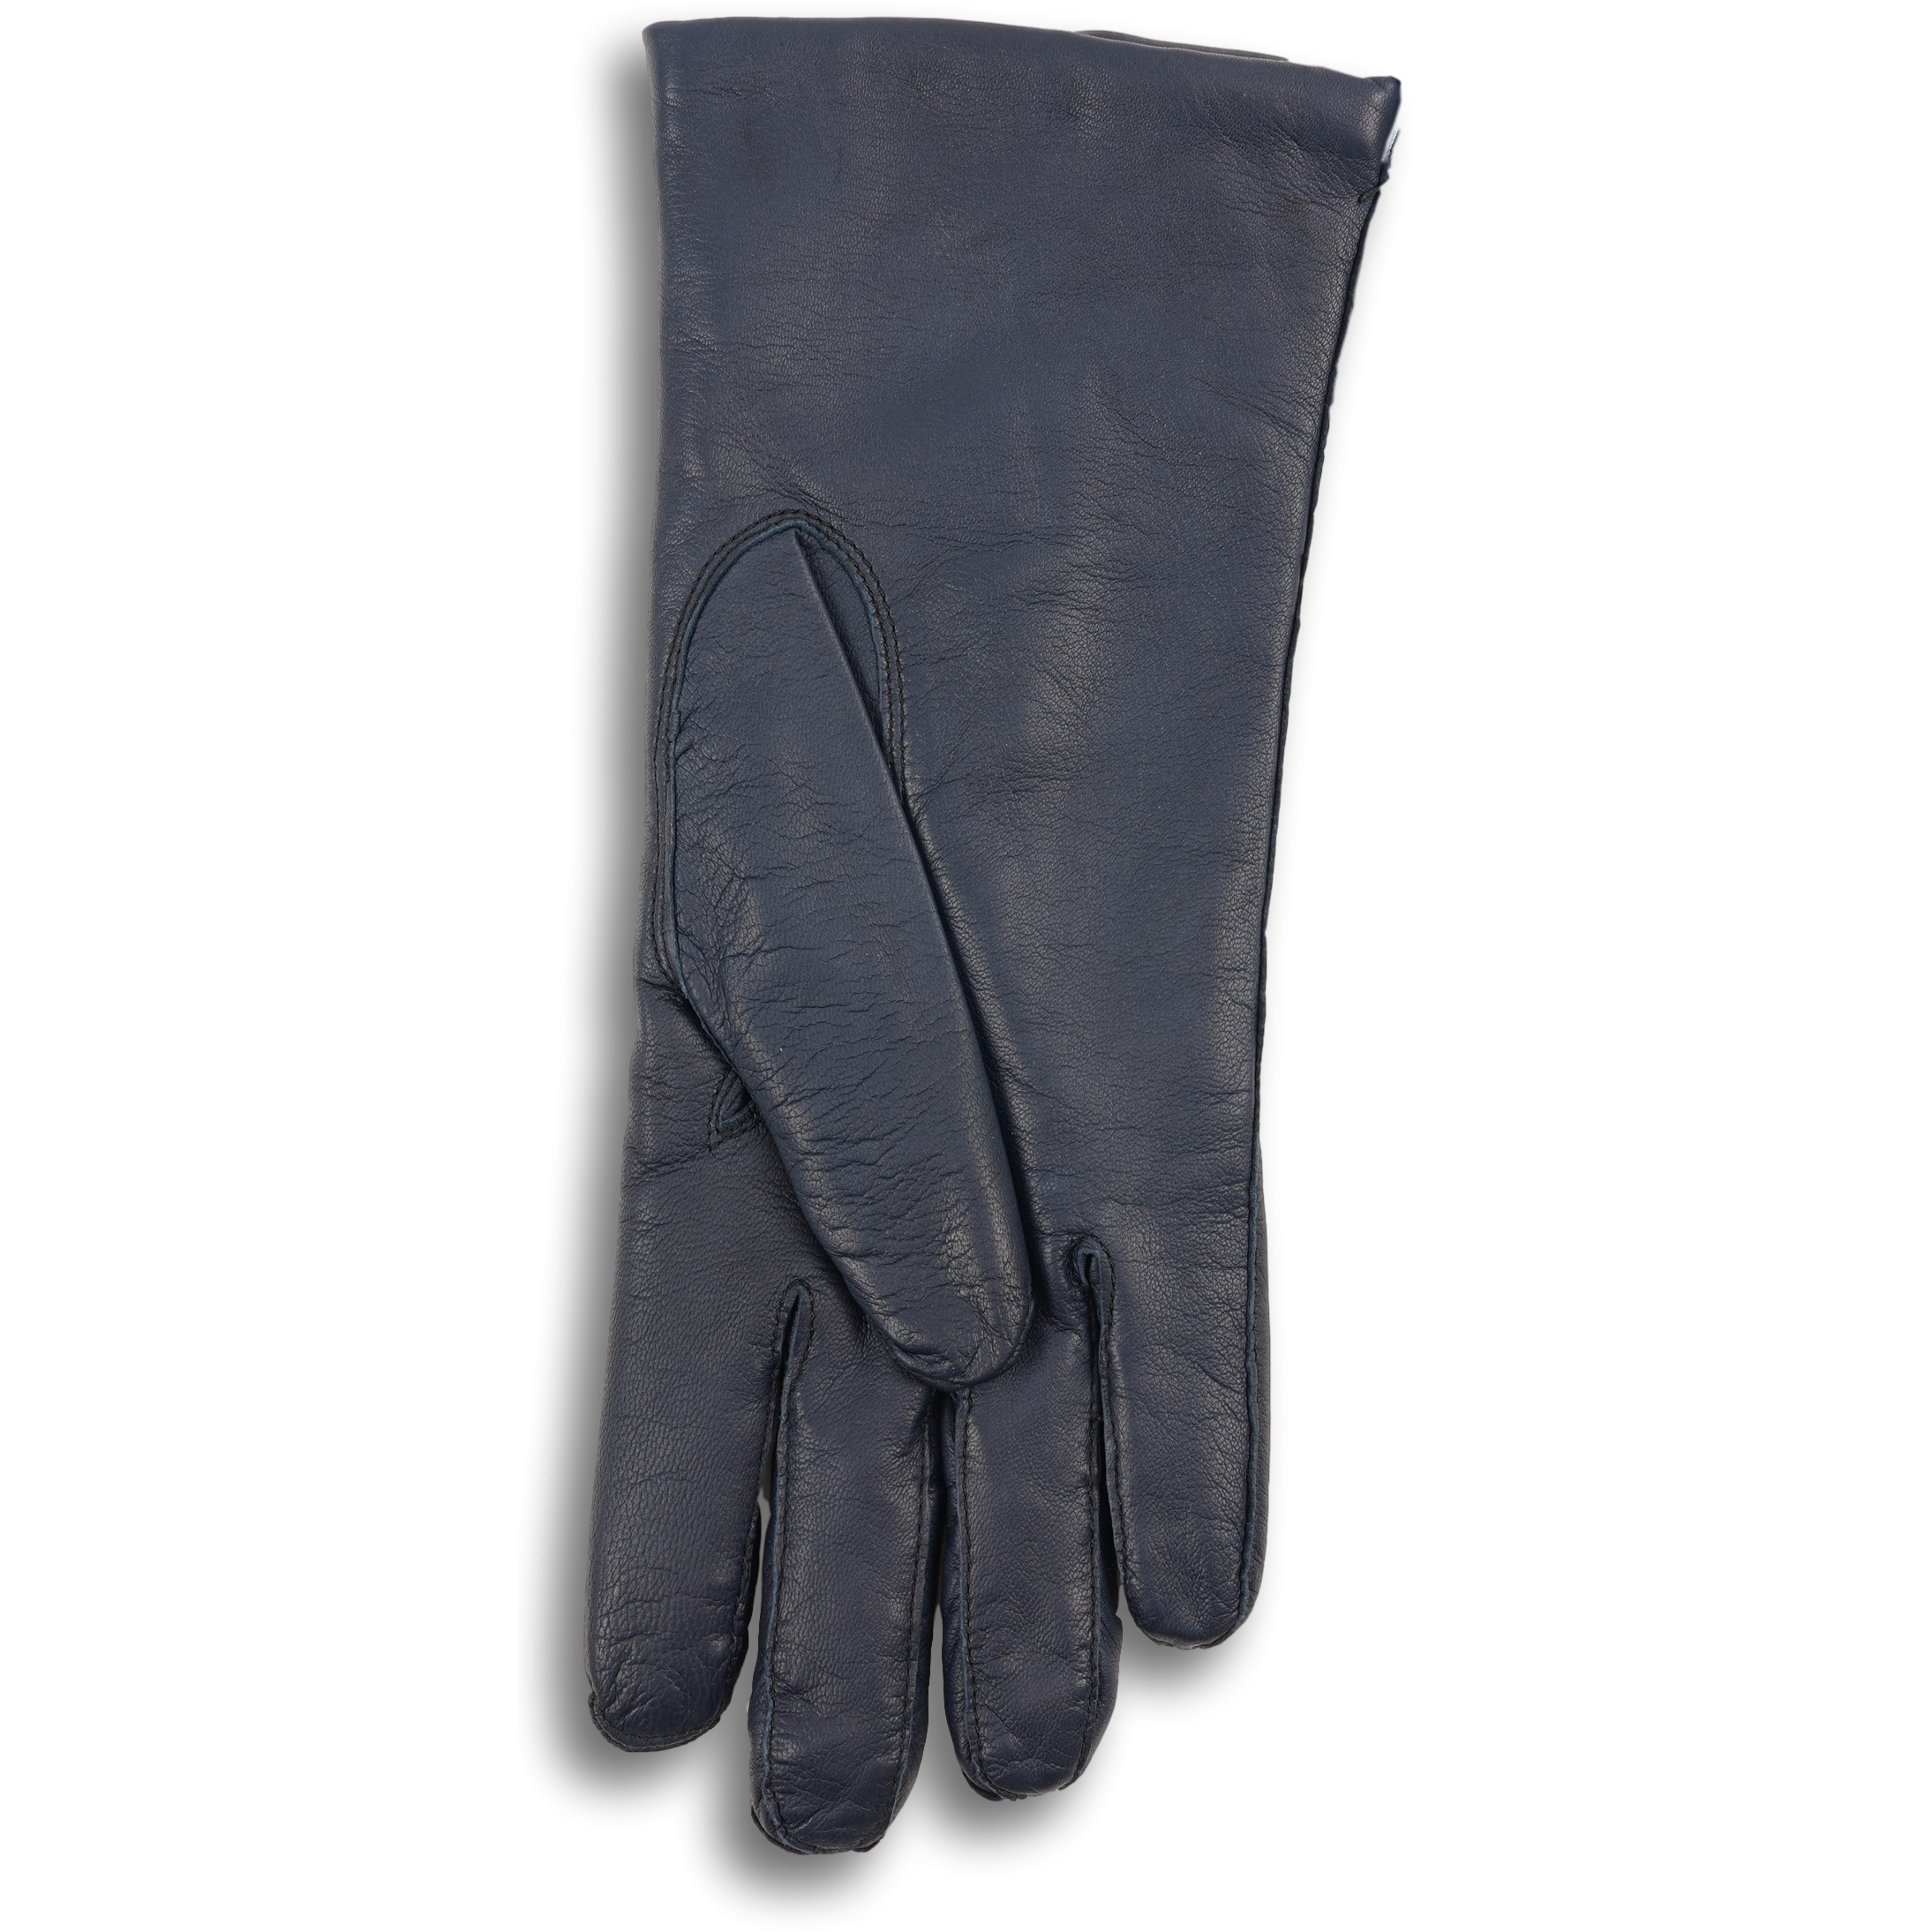 Ladies Handsewn Capeskin Gloves with Cashmere Lining